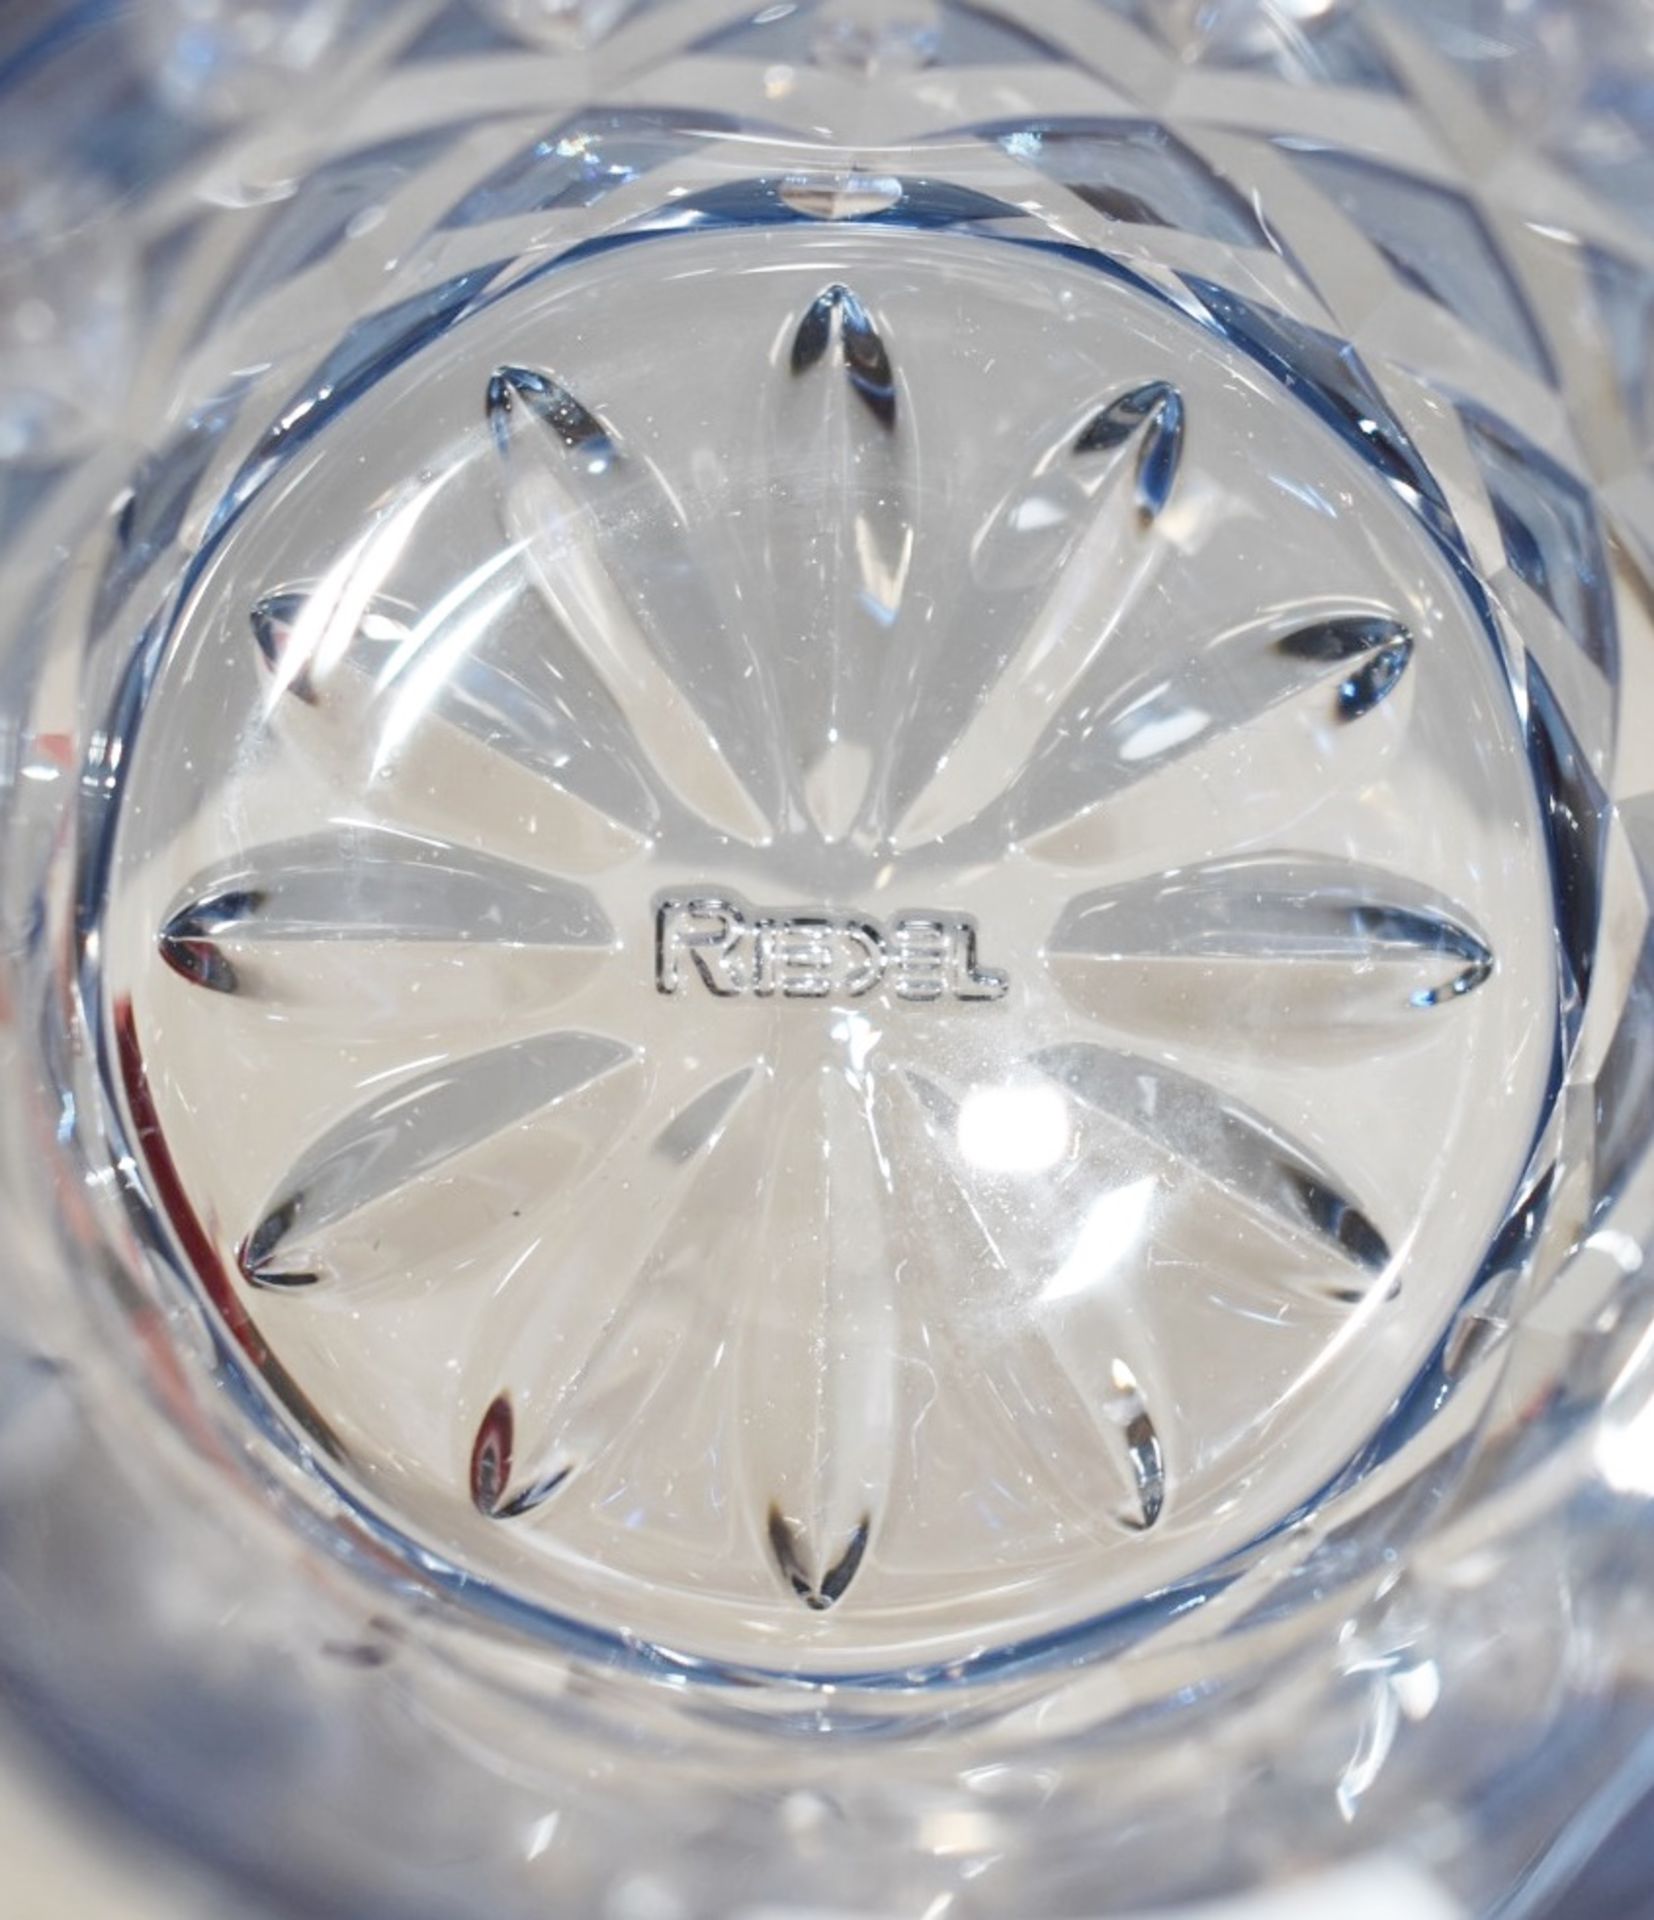 3 x RIEDEL 'Laudon' Luxury Crystal Whisky Glasses In Light Blue (295ml) - Total RRP £225.00 - Image 9 of 10